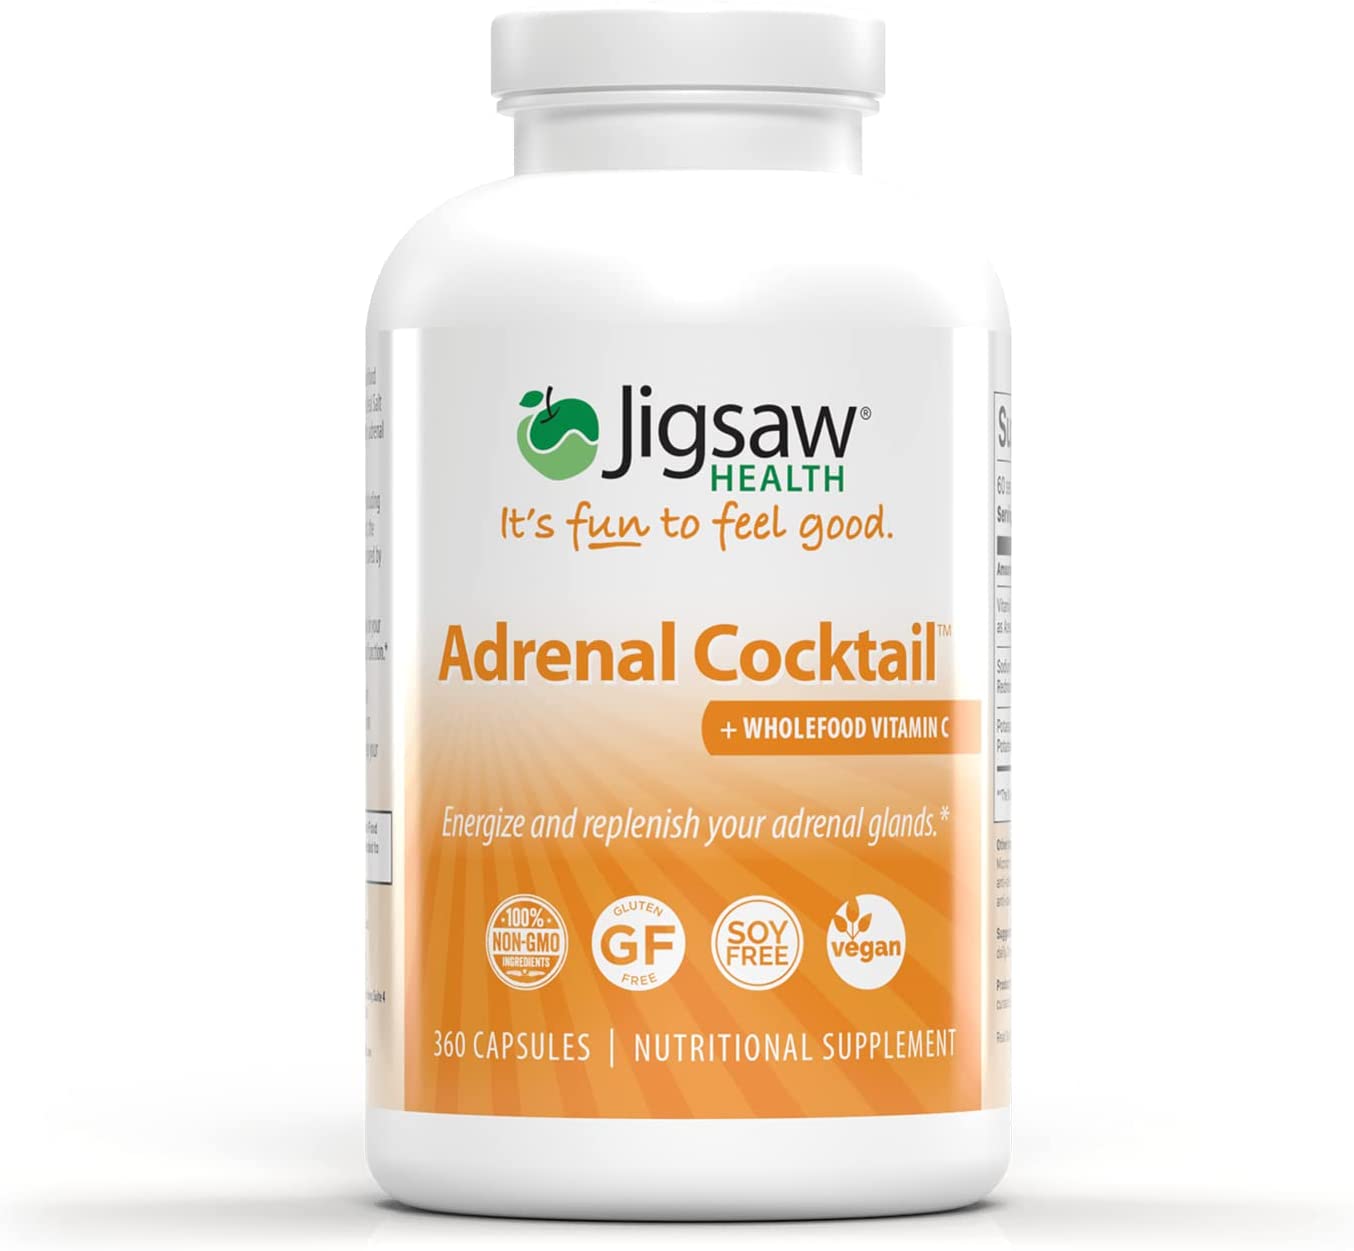 Jigsaw Health Adrenal Cocktail with Whole Food Vitamin C, 360 Capsules